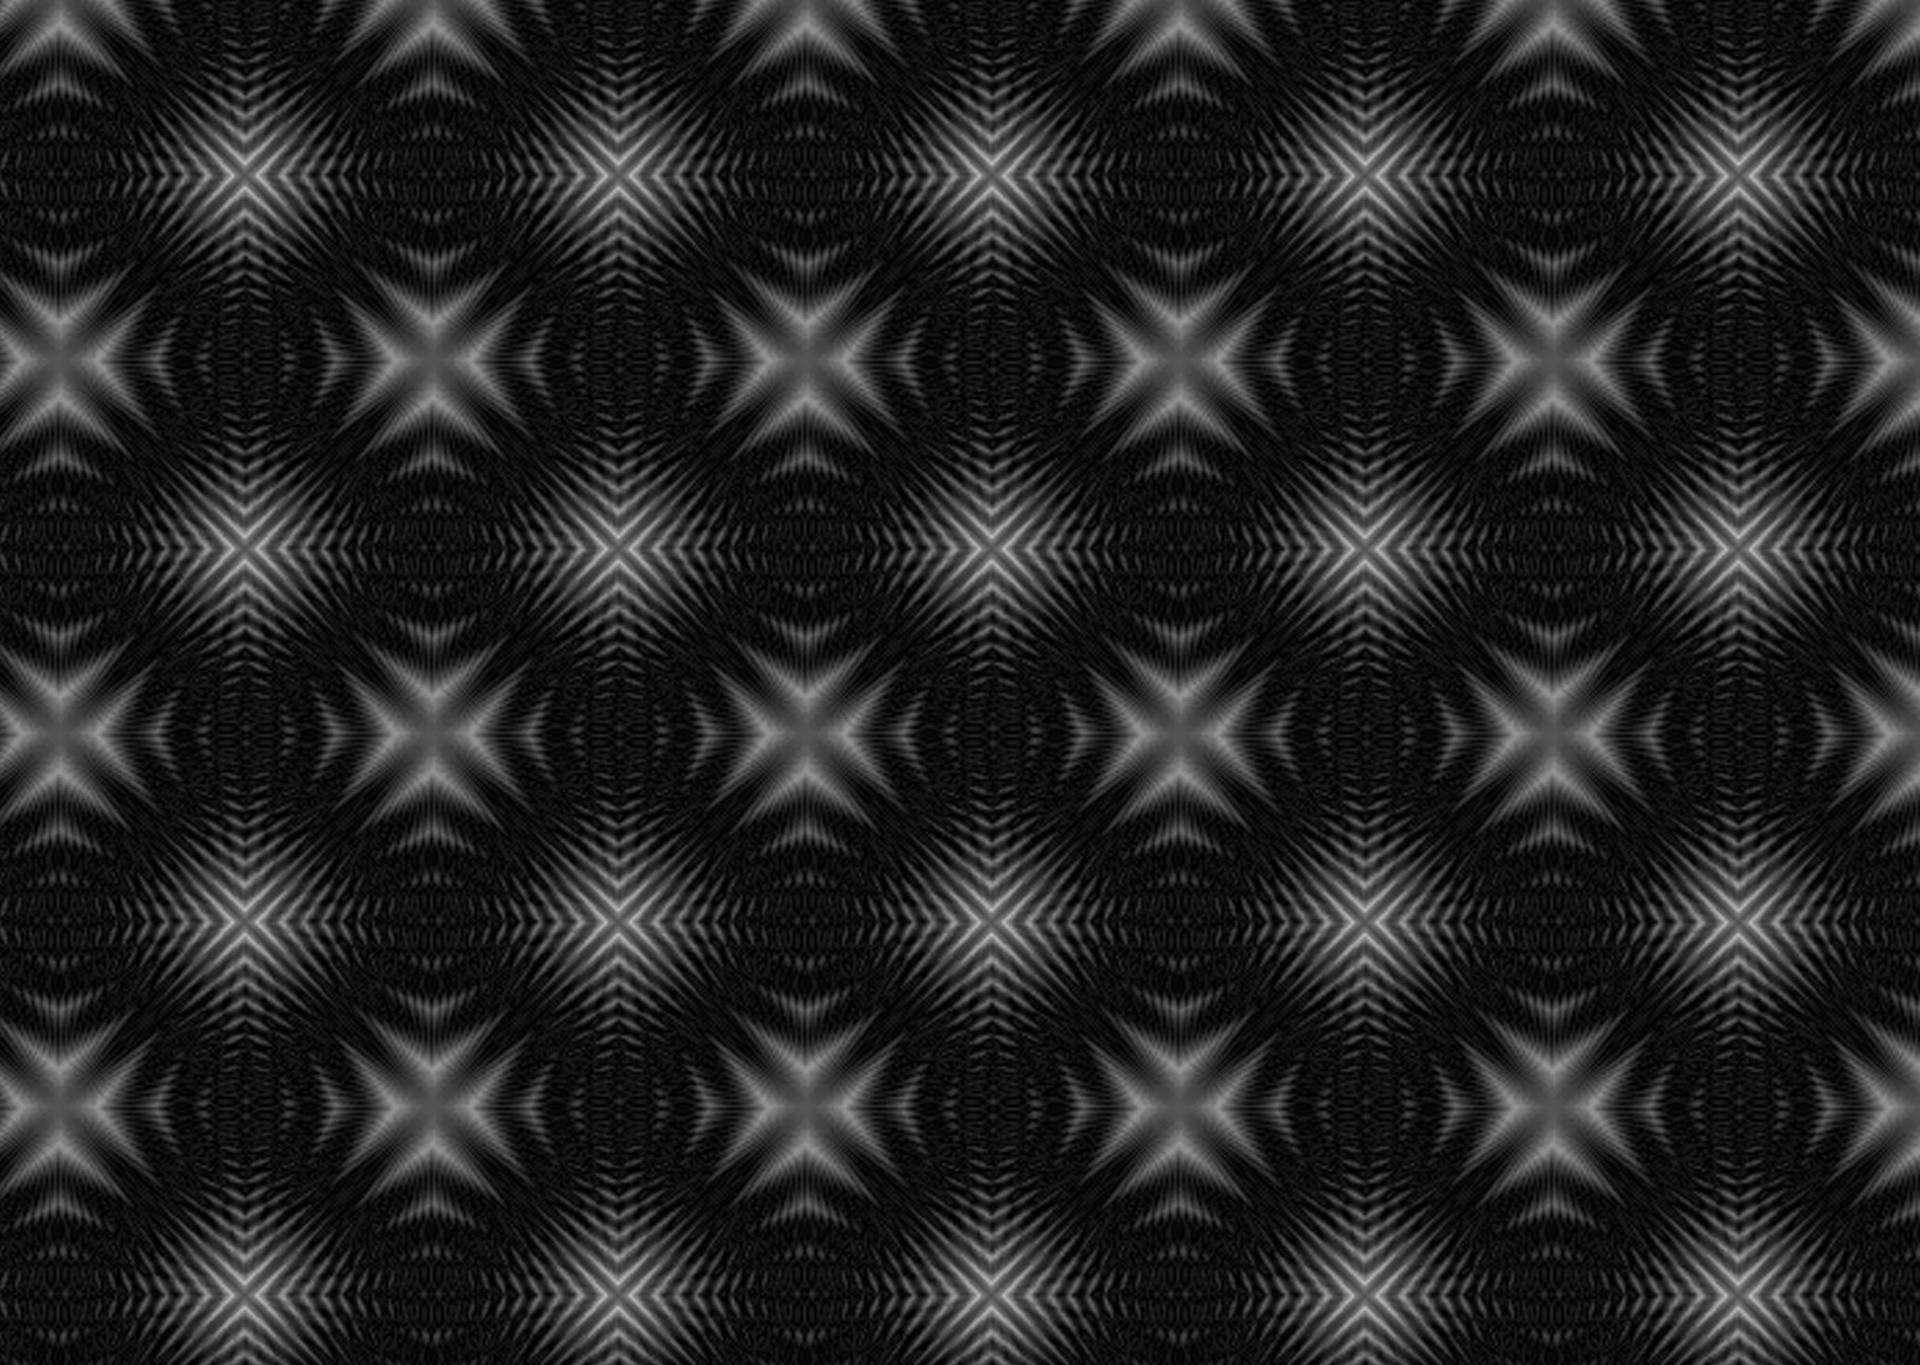 Black And White 2441X1735 Wallpaper and Background Image